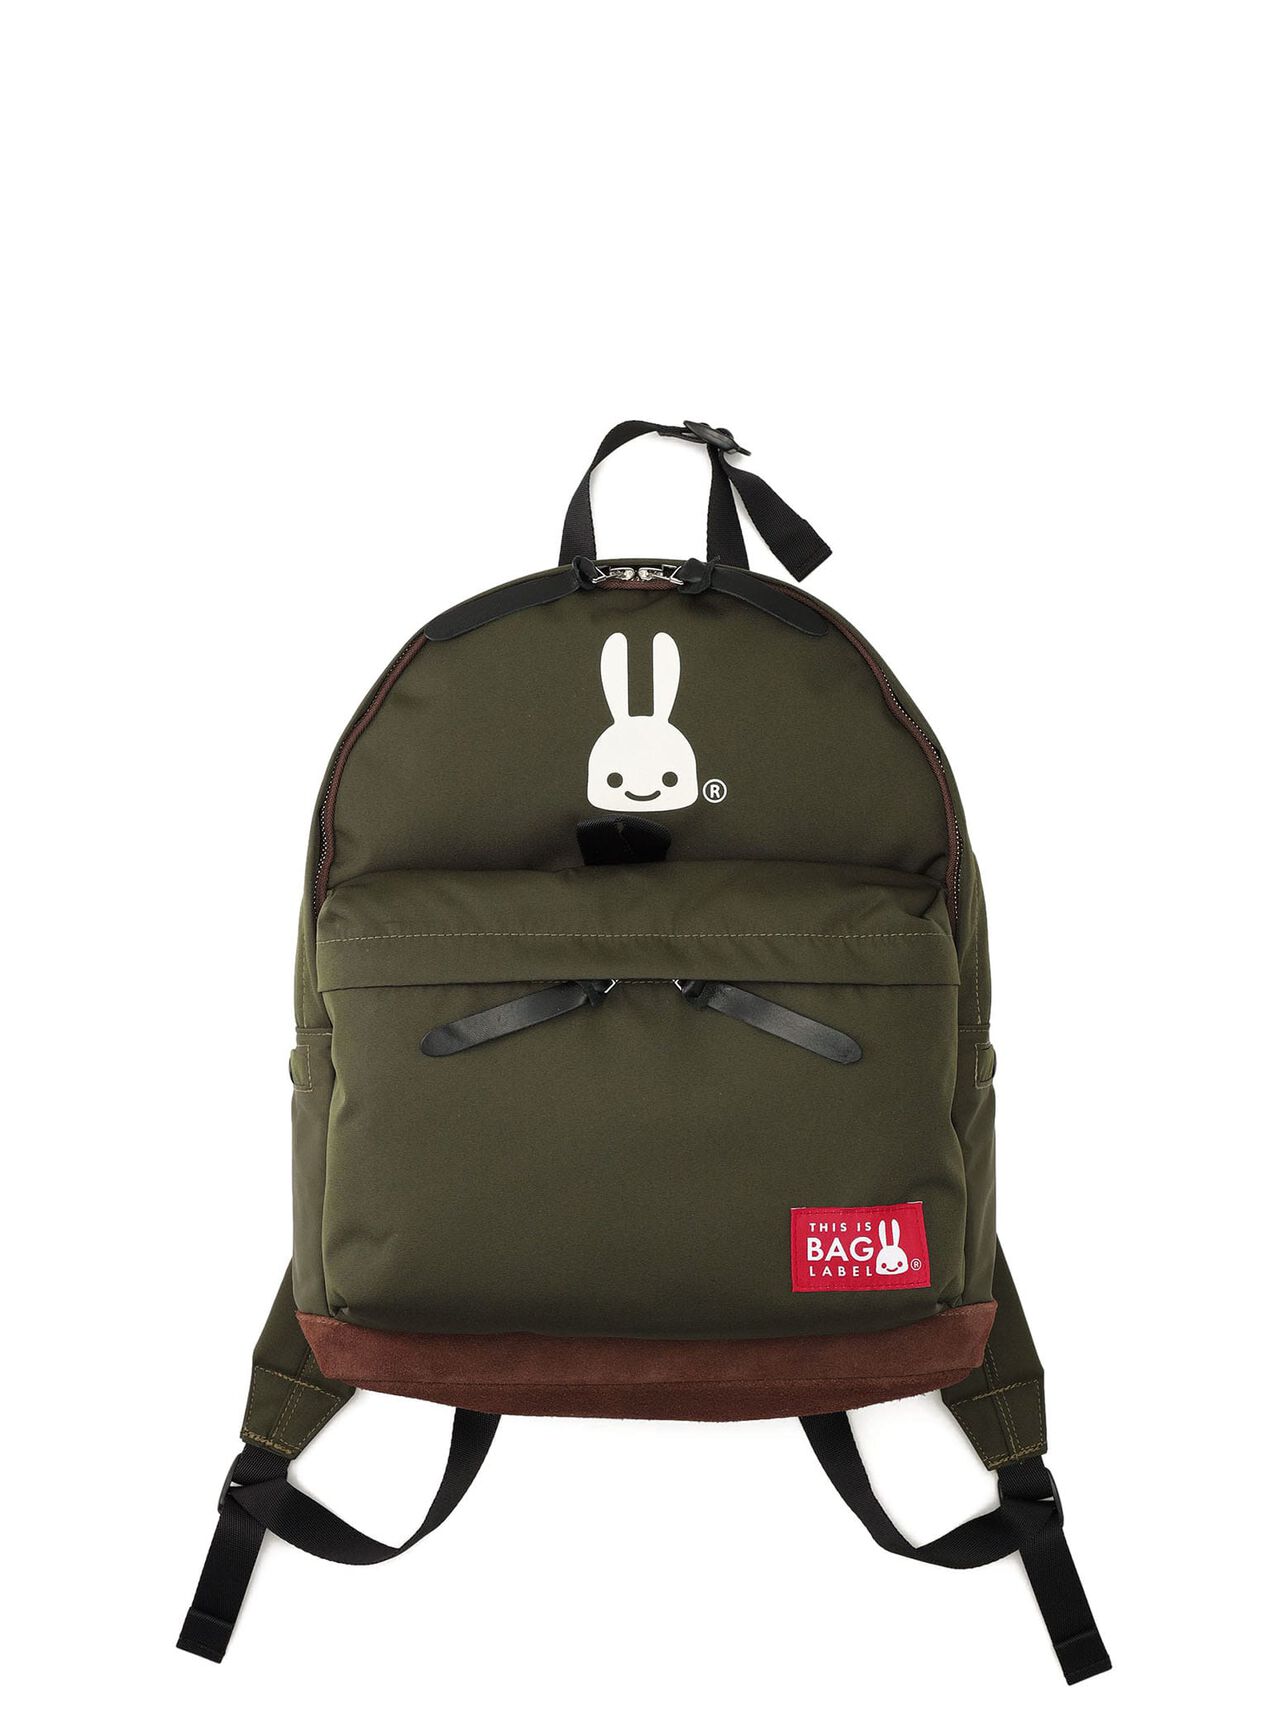 CUNE backpack in Cordura R with leather bottom M,ONE, large image number 0